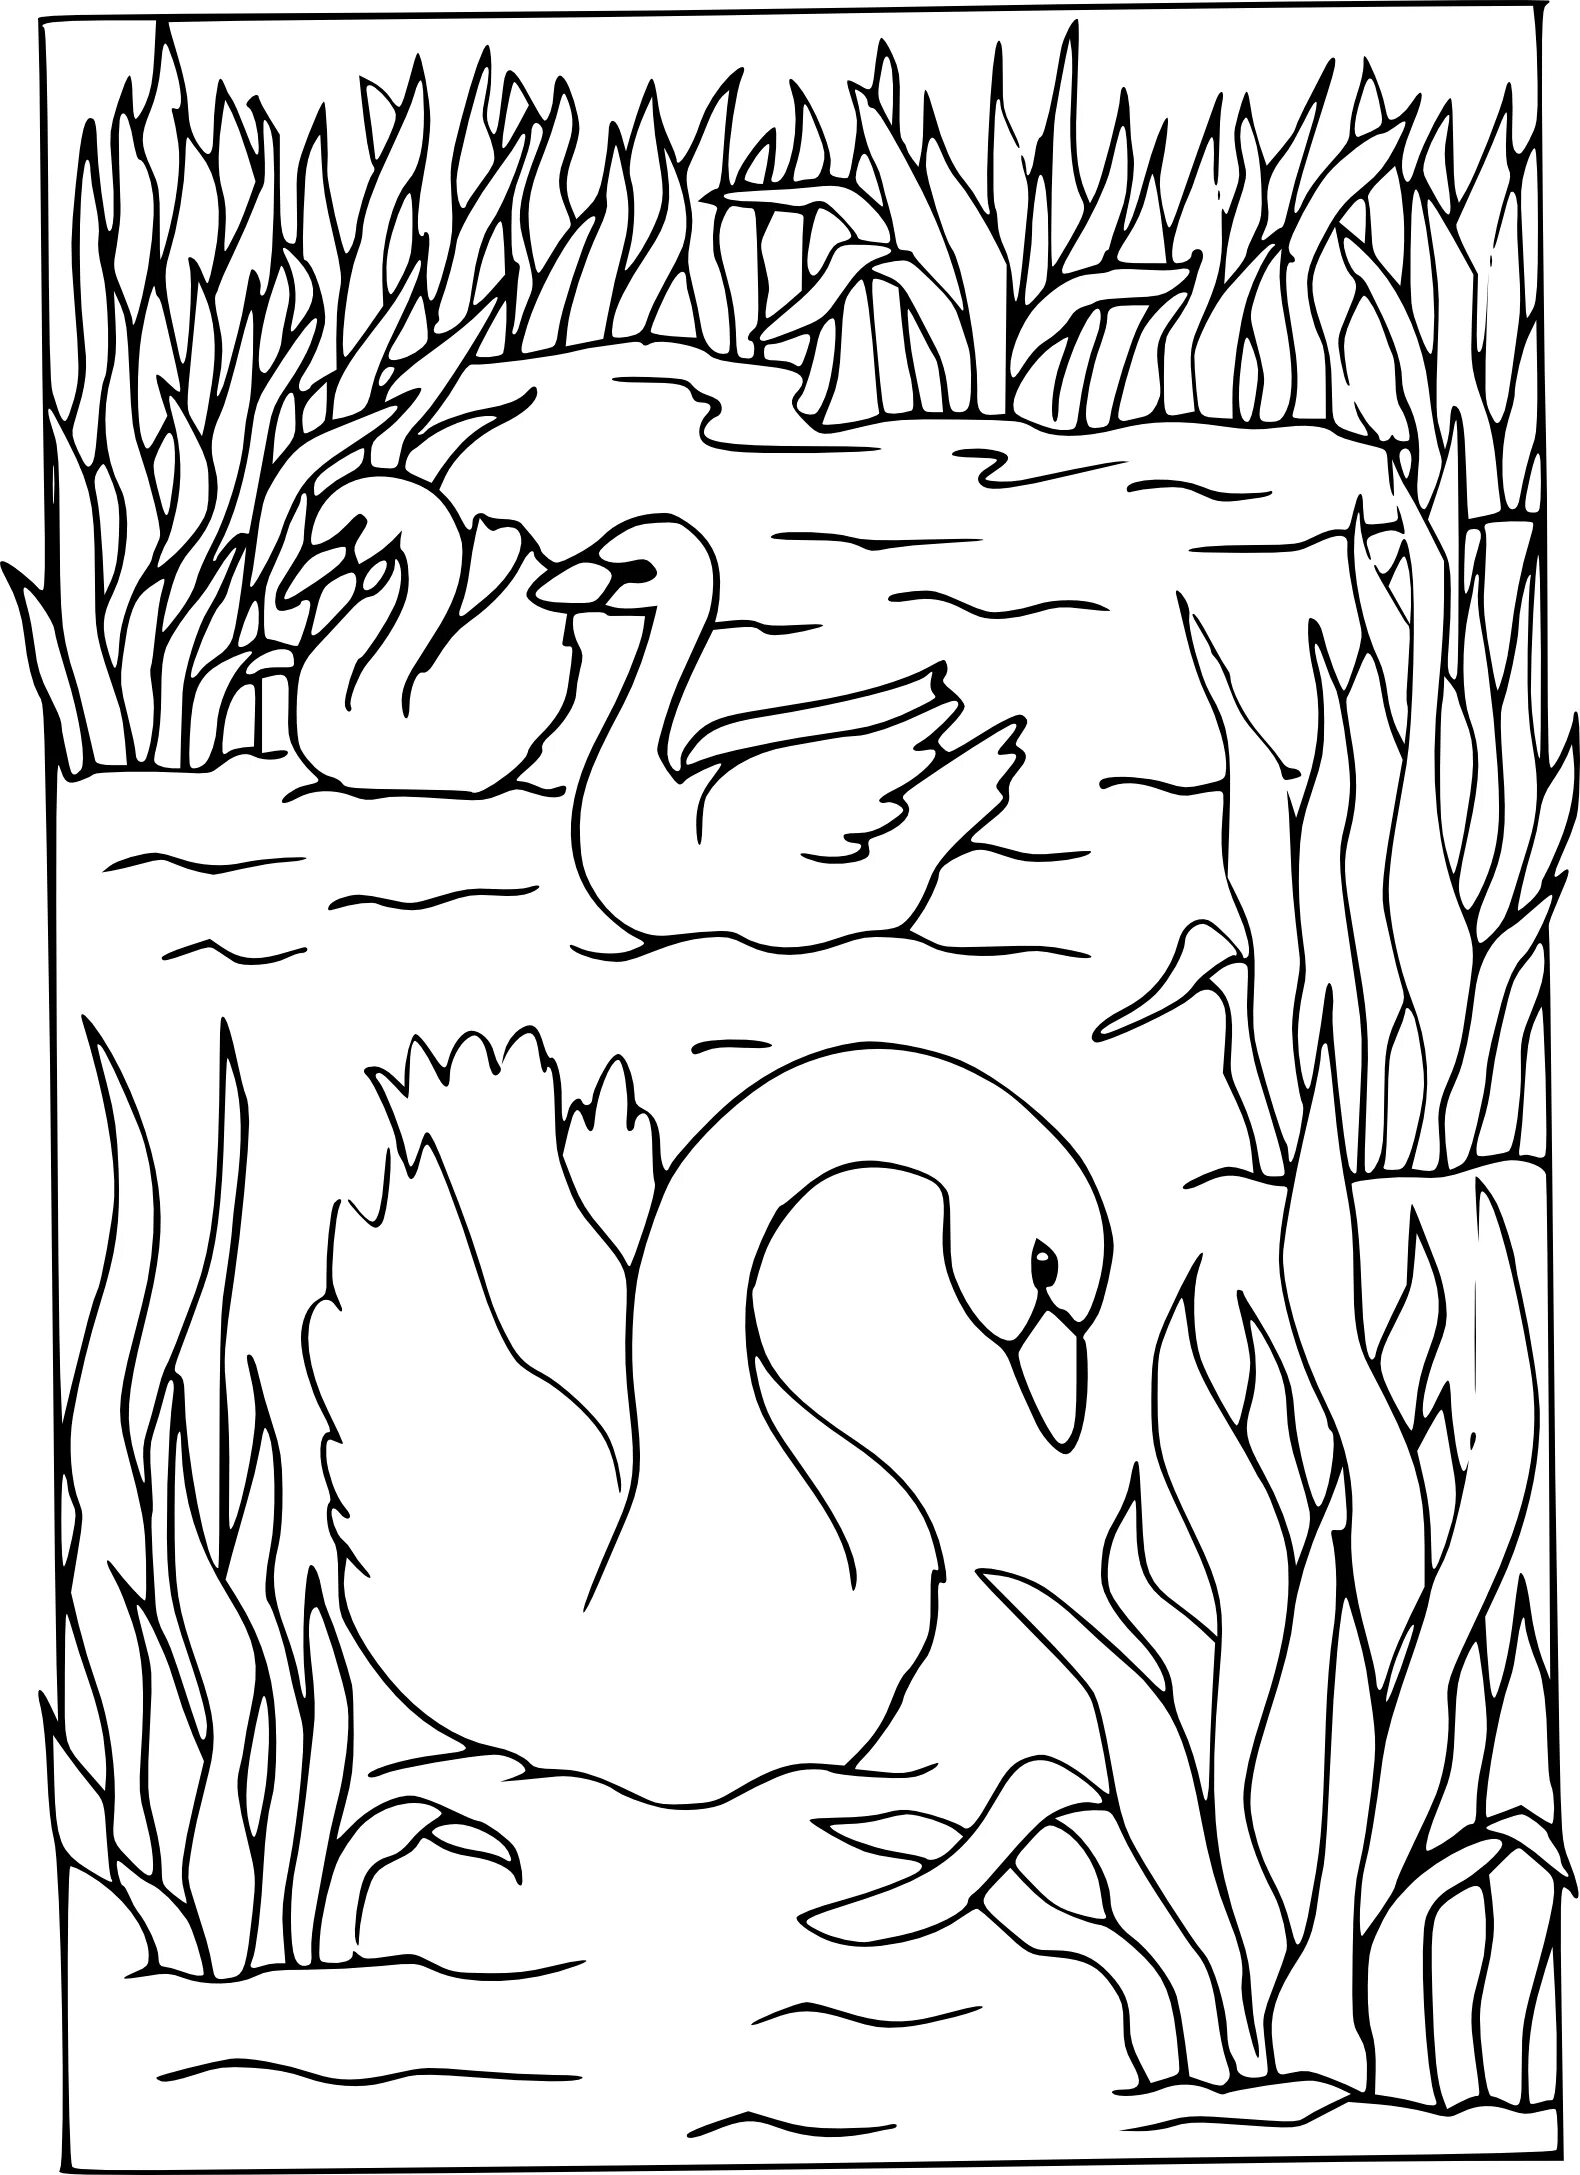 Holiday swan lake coloring book for kids